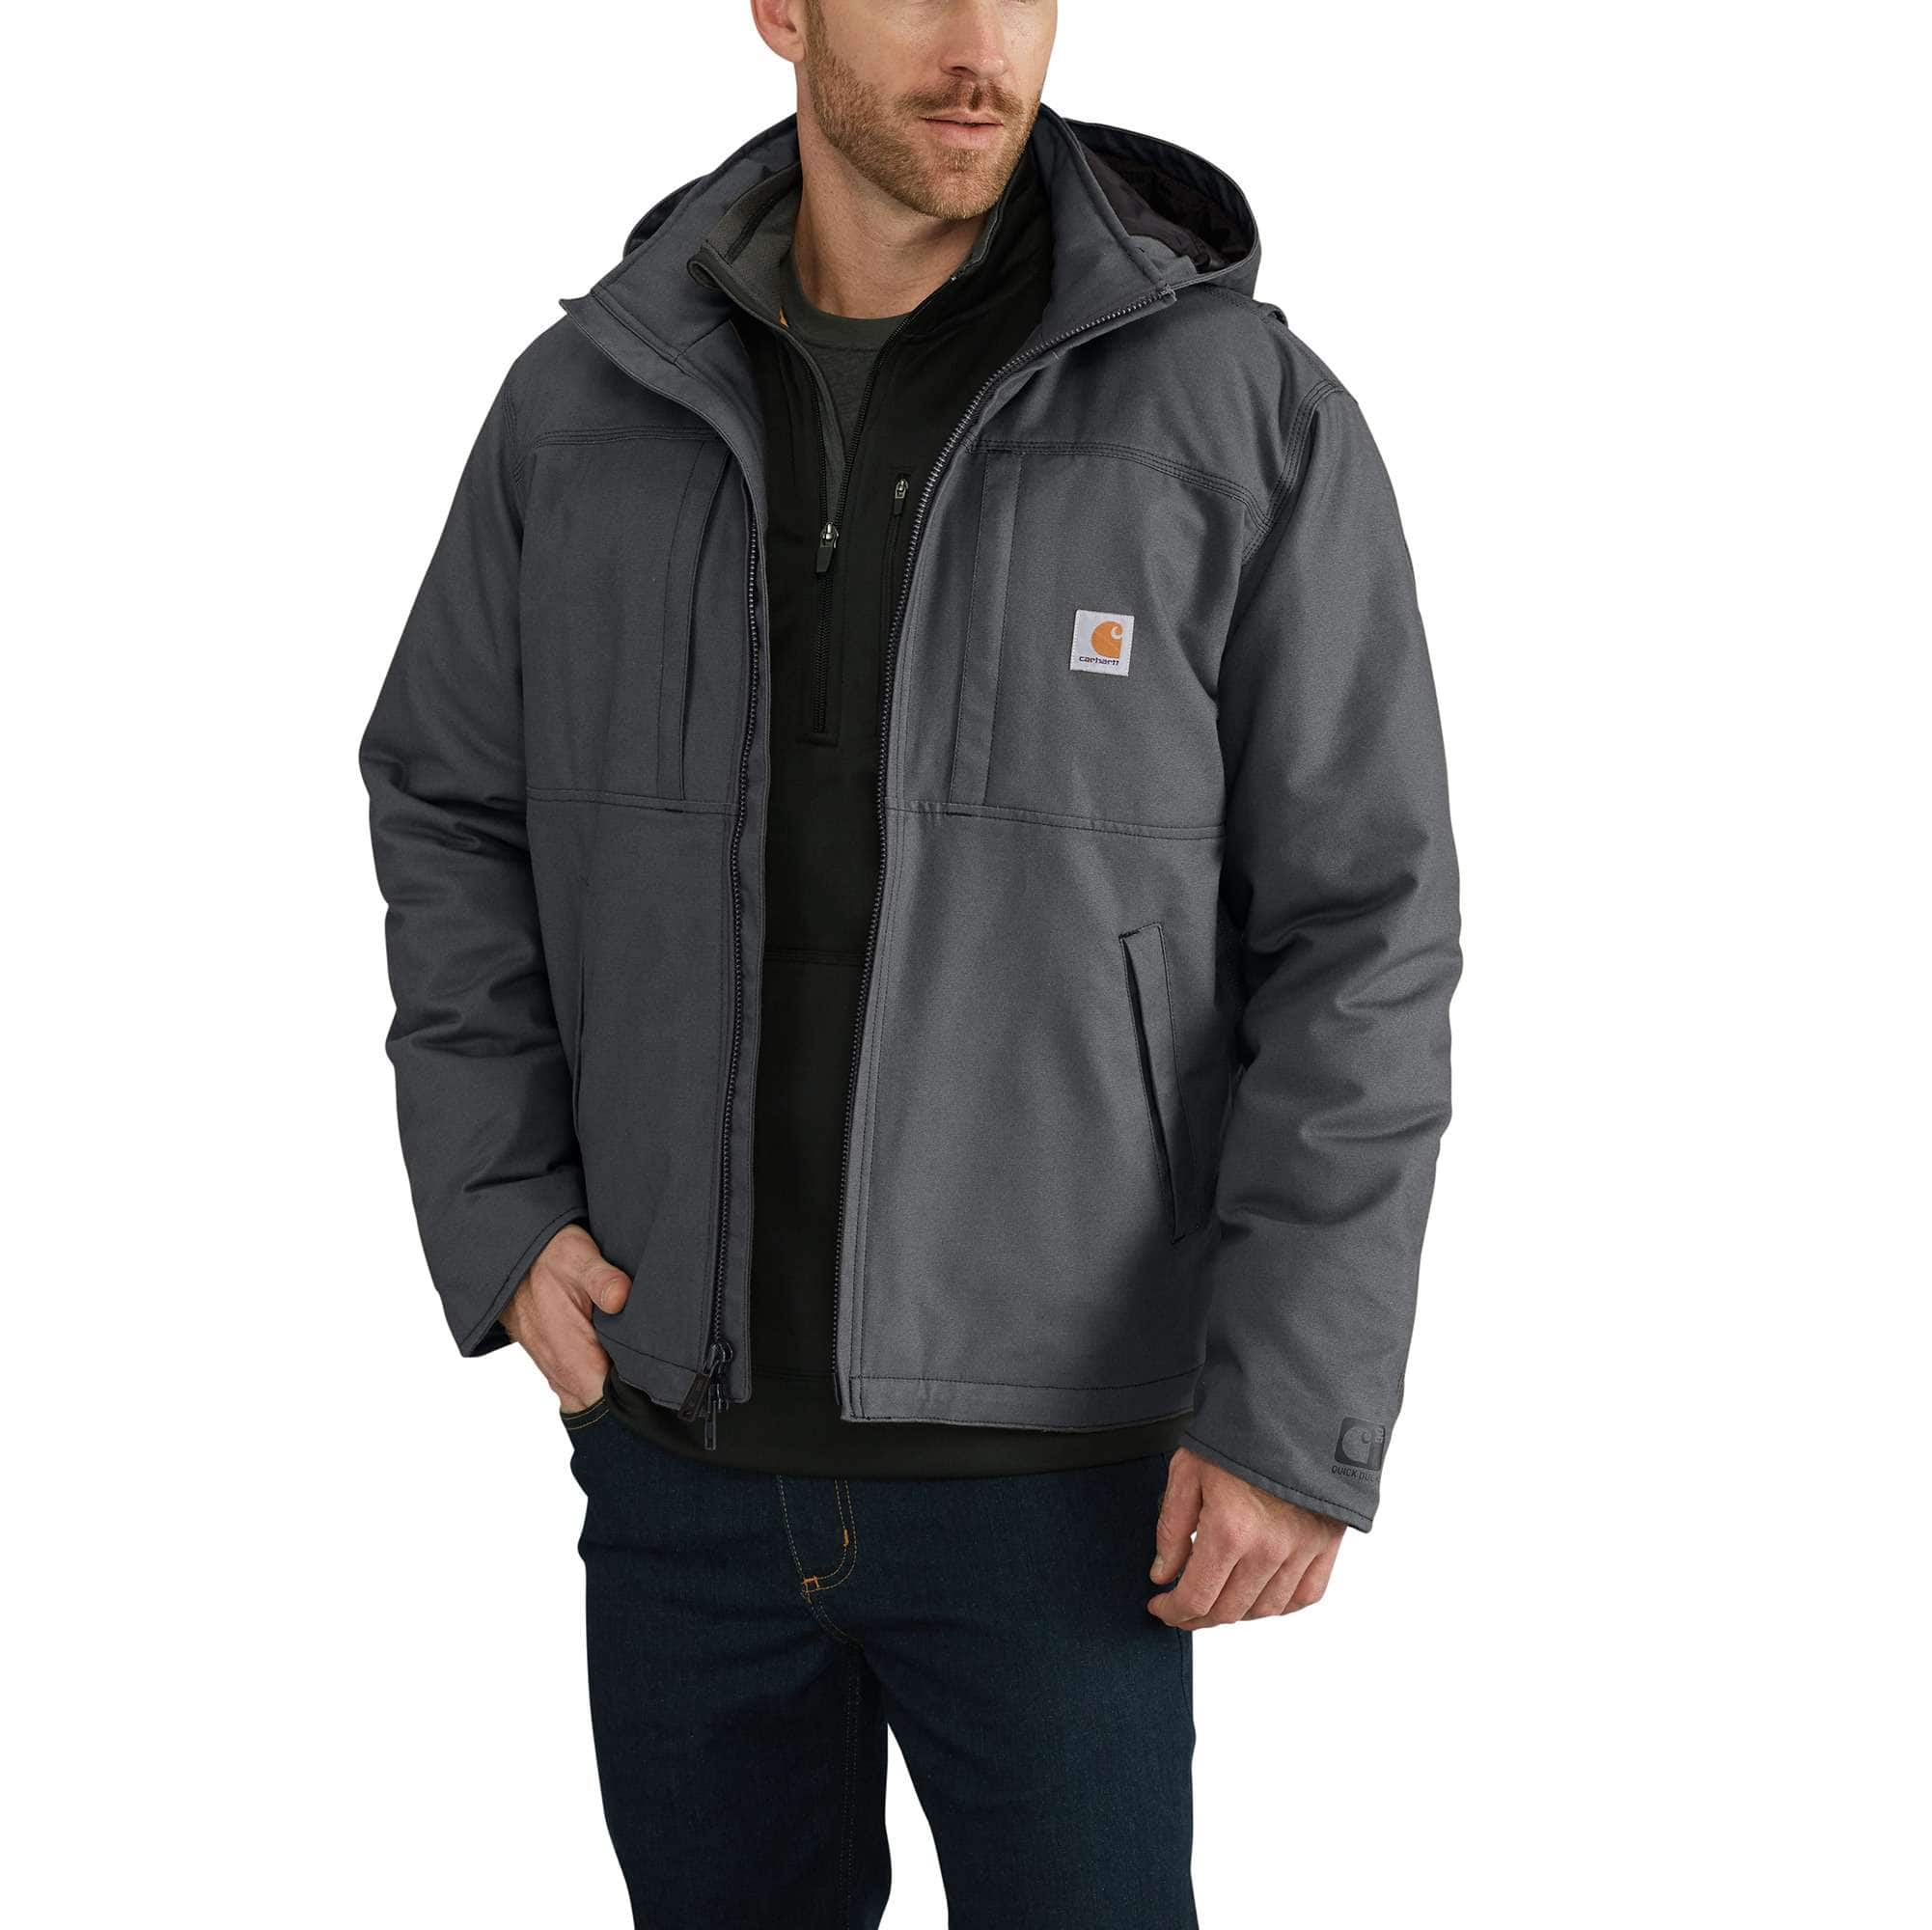 Full Swing® Loose Fit Quick Duck Insulated Jacket